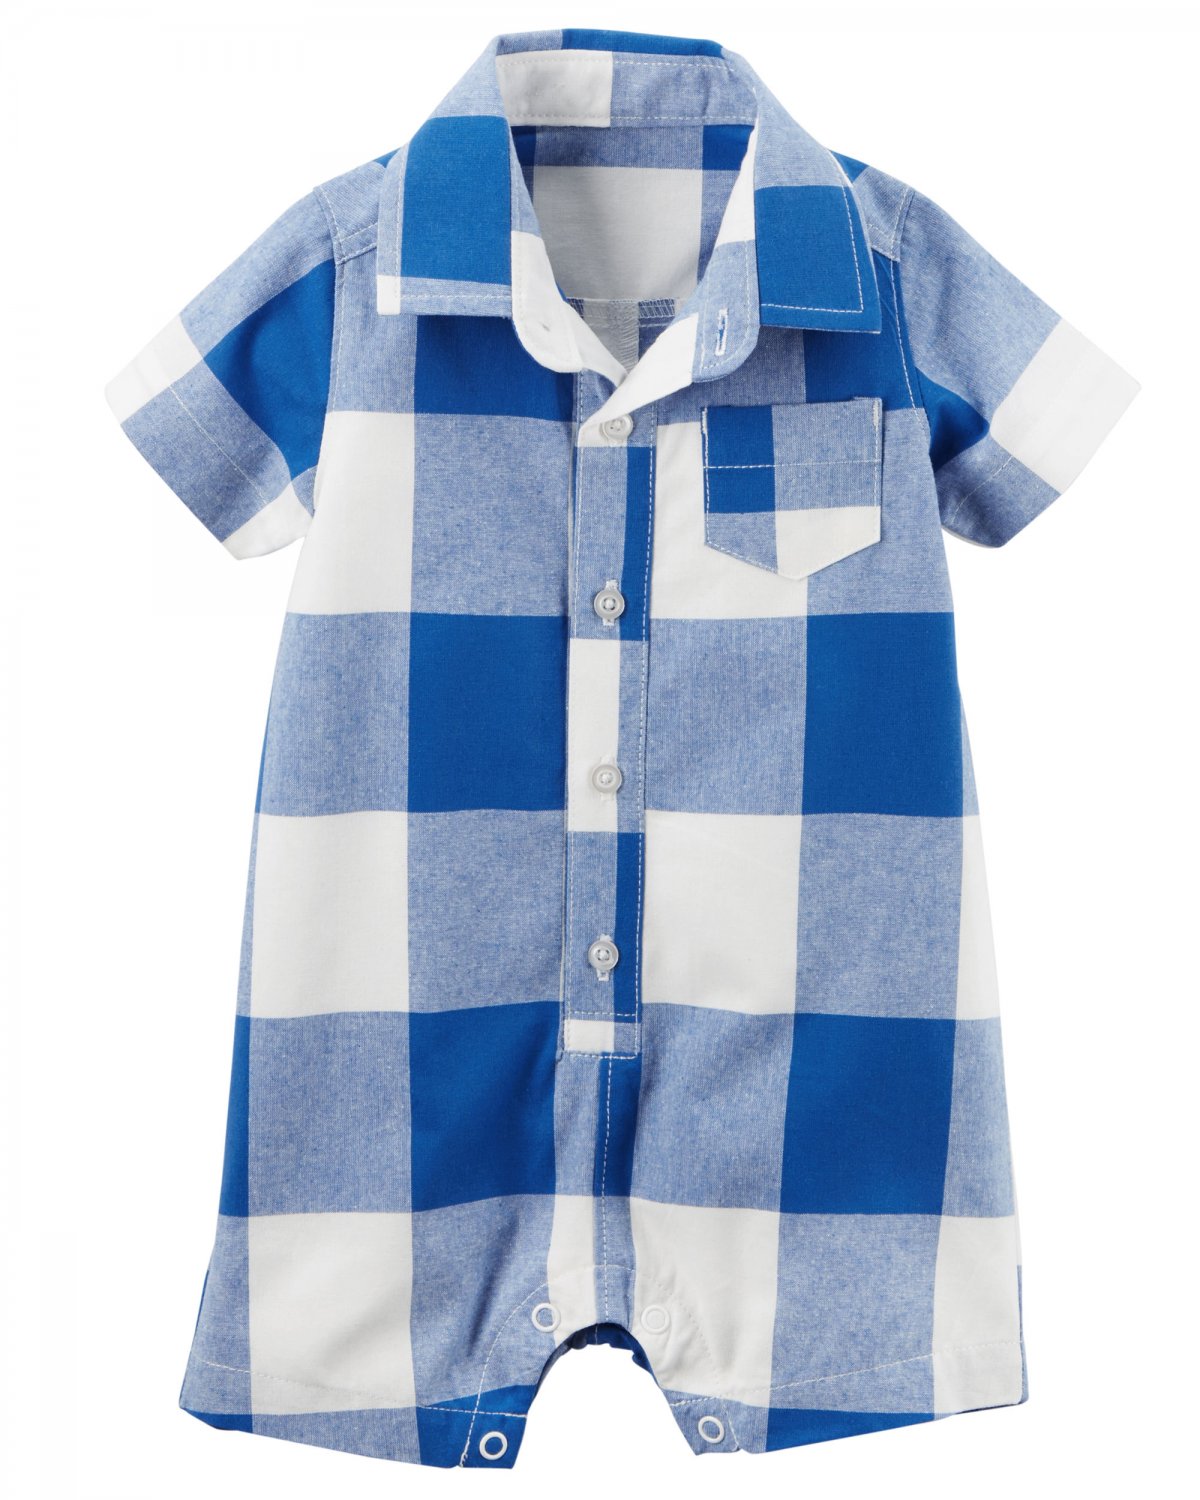 Carters Buffalo Check Romper Blue White Plaid Baby Boys 6 Months Carter's OnePiece